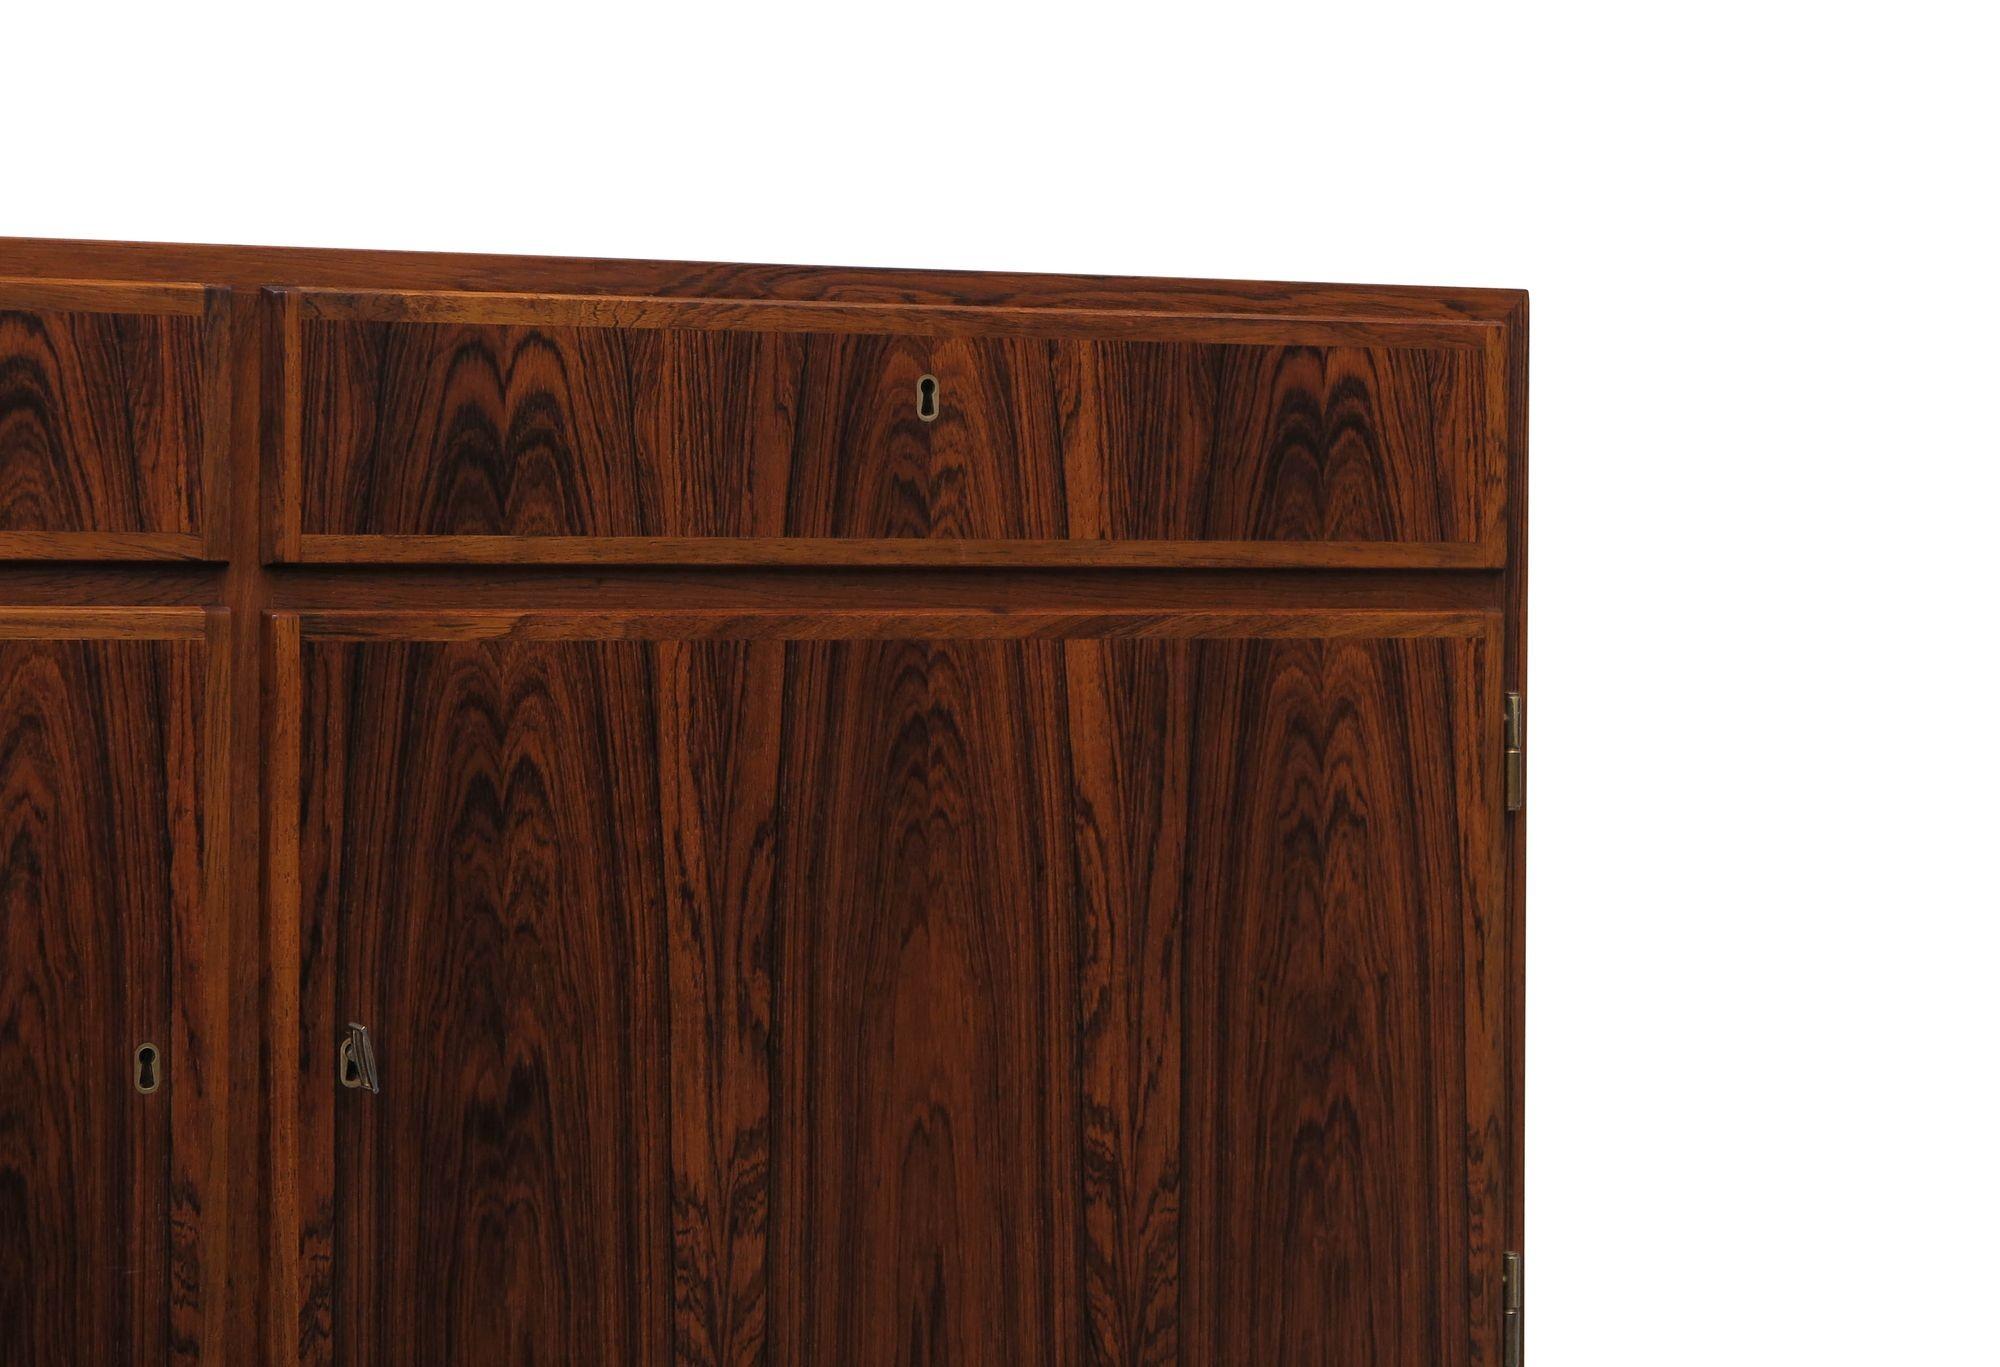 Mid-century Danish rosewood credenza designed by Kai Winding in 1958, Denmark. This finely crafted cabinet showcases book-matched rosewood with mitered edges and locking doors and drawers, with a mahogany interior with adjustable shelves, and